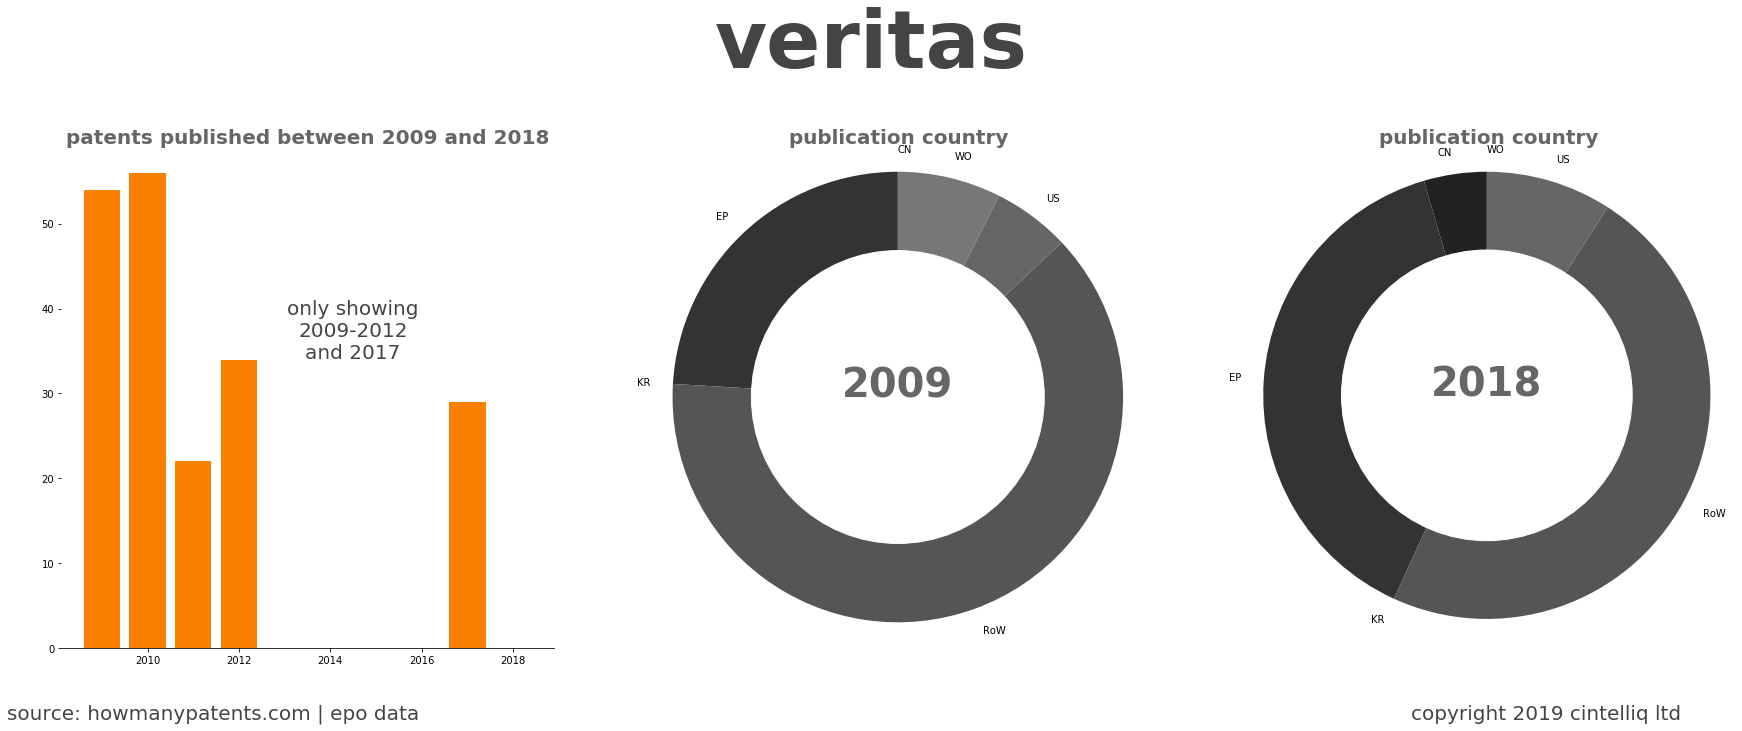 summary of patents for Veritas